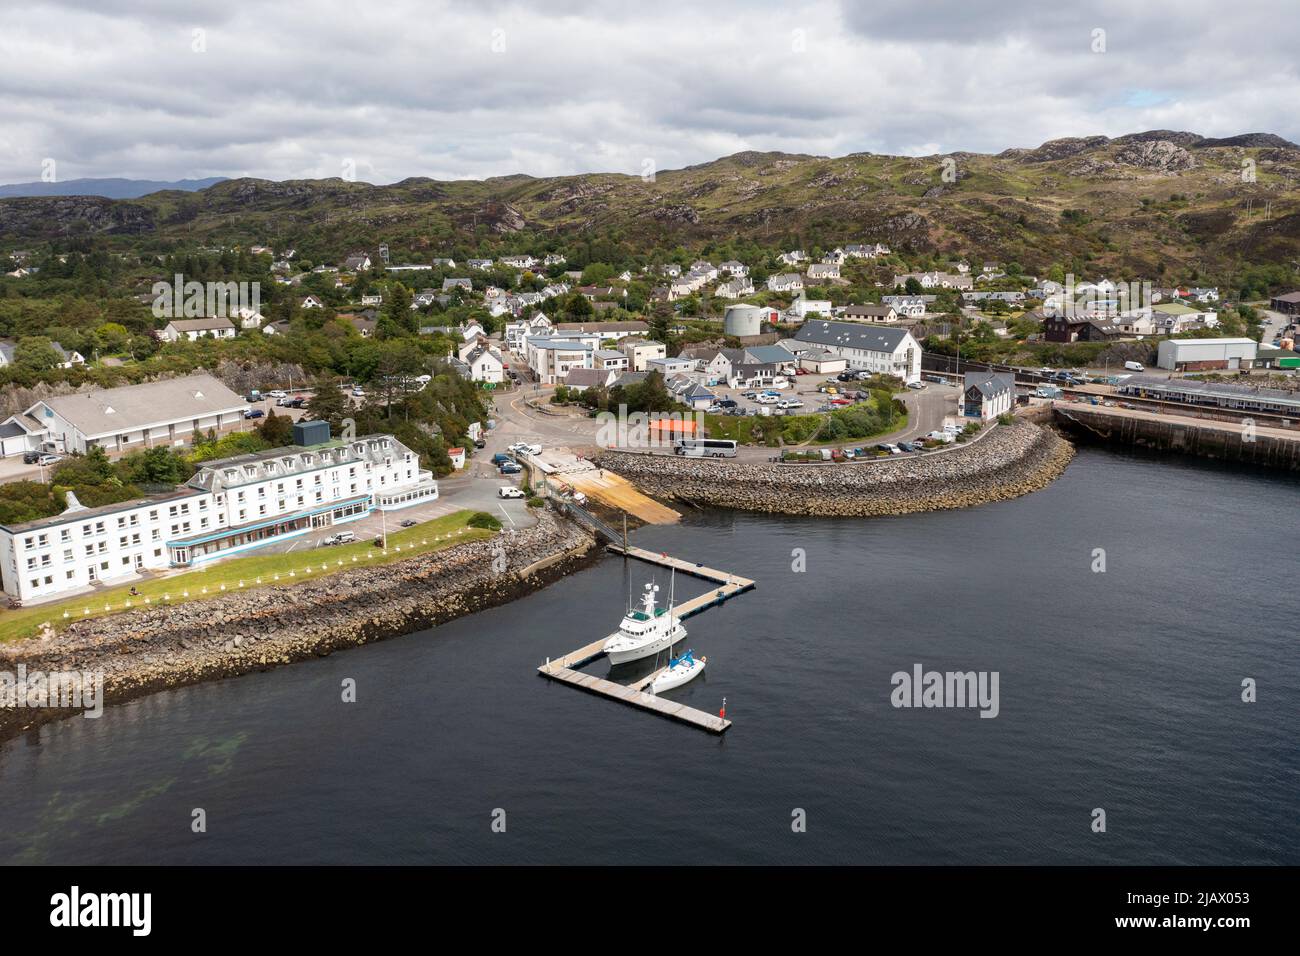 Aerial view of the Kyle of Lochalsh, Ross, Skye and Lochaber district, Scotland, United Kingdom. Stock Photo